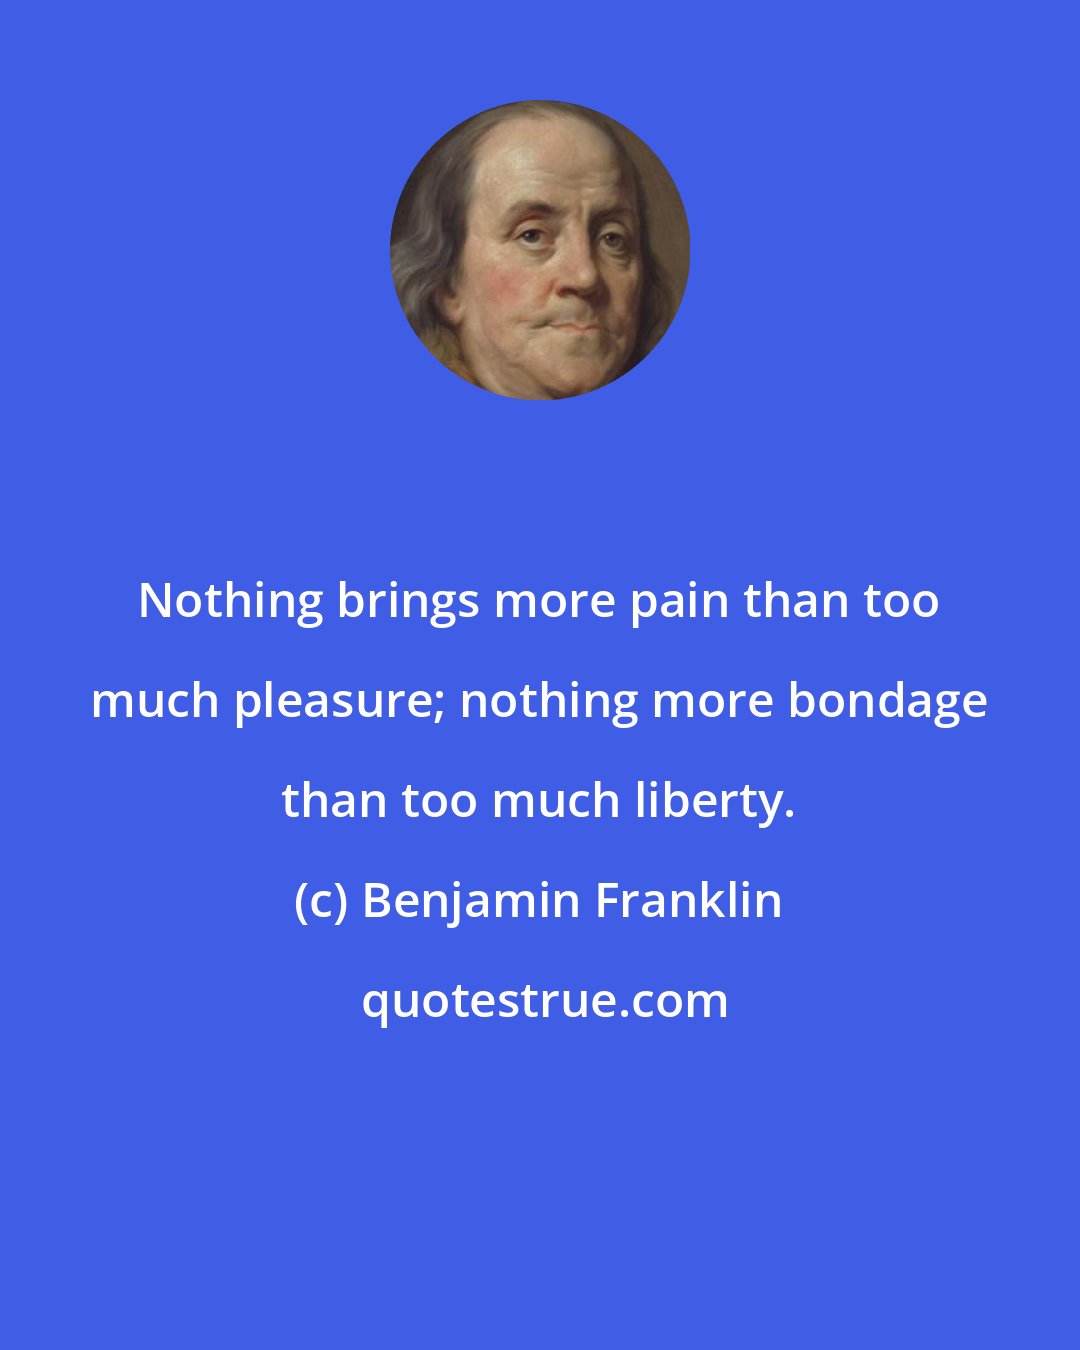 Benjamin Franklin: Nothing brings more pain than too much pleasure; nothing more bondage than too much liberty.